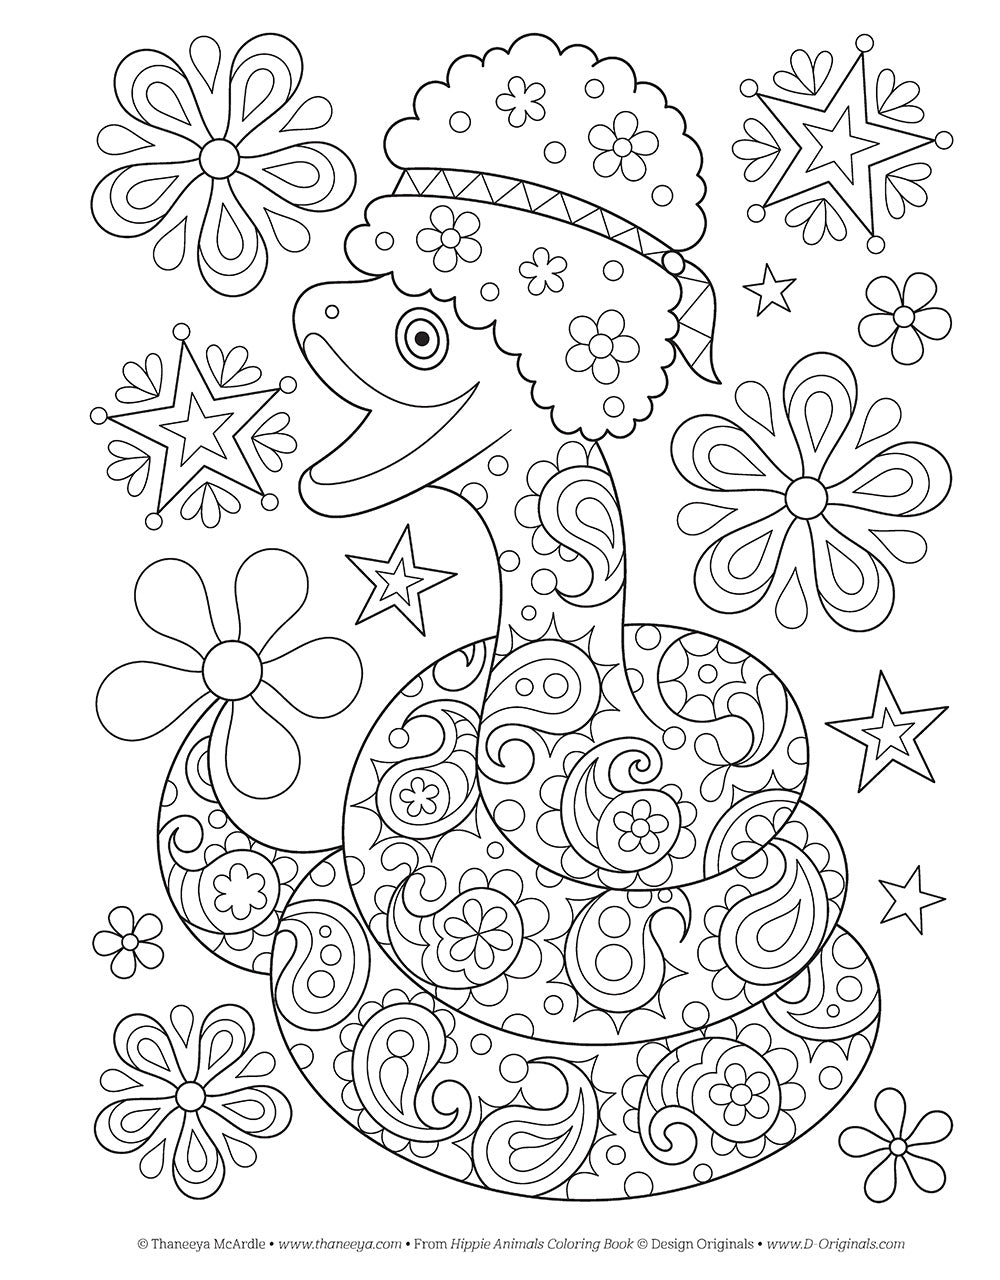 Hippie Animal - Coloring Book for adults - Bat, Quokka, Badger